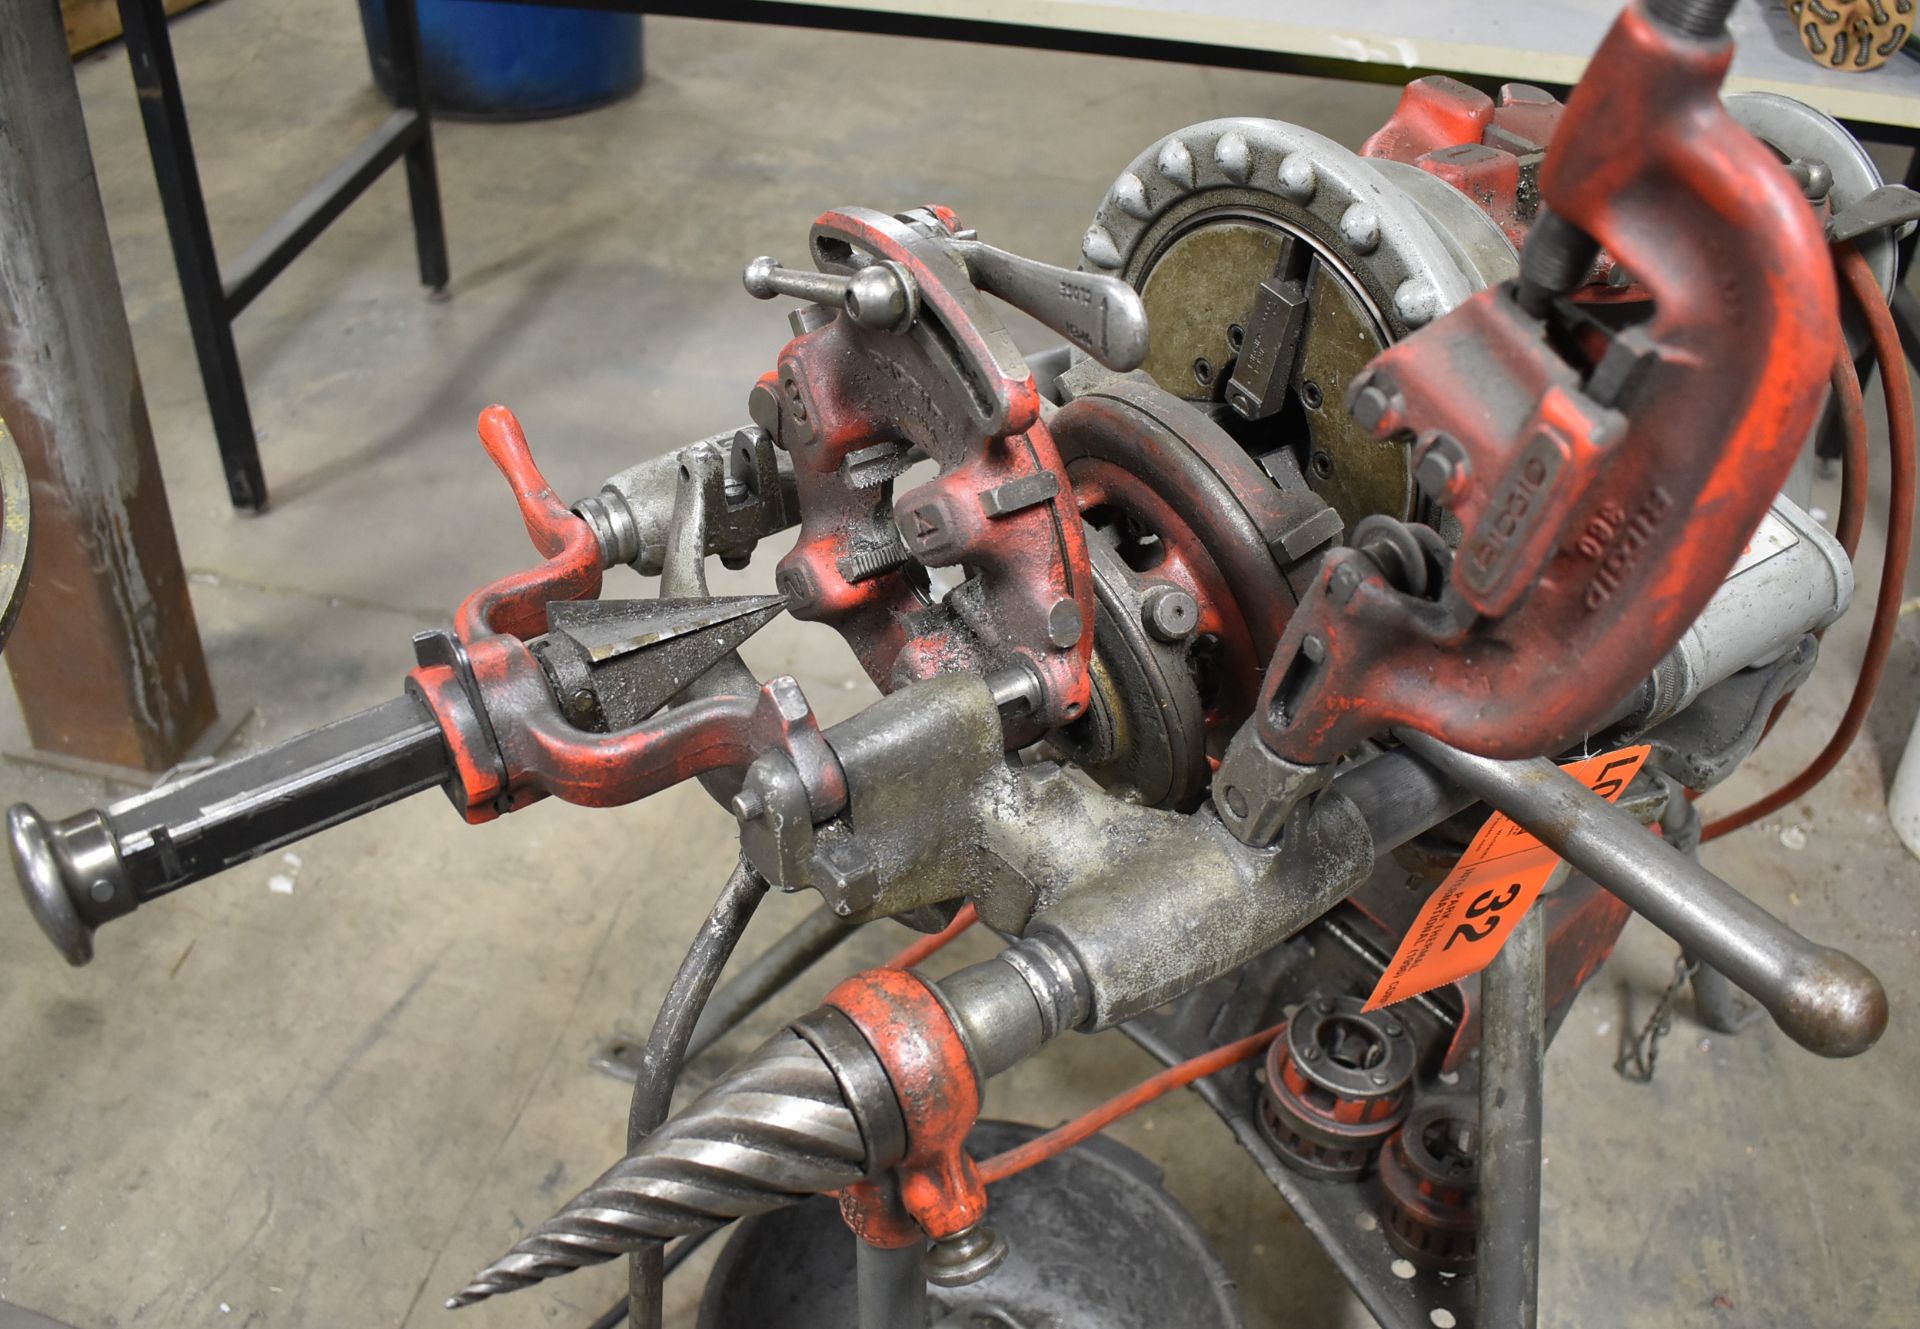 RIDGID 300 PIPE THREADER WTIH THREADING HEADS, PIPE CUTTER, THREADING DIES AND TRI-STAND, S/N: N/A - Image 2 of 8